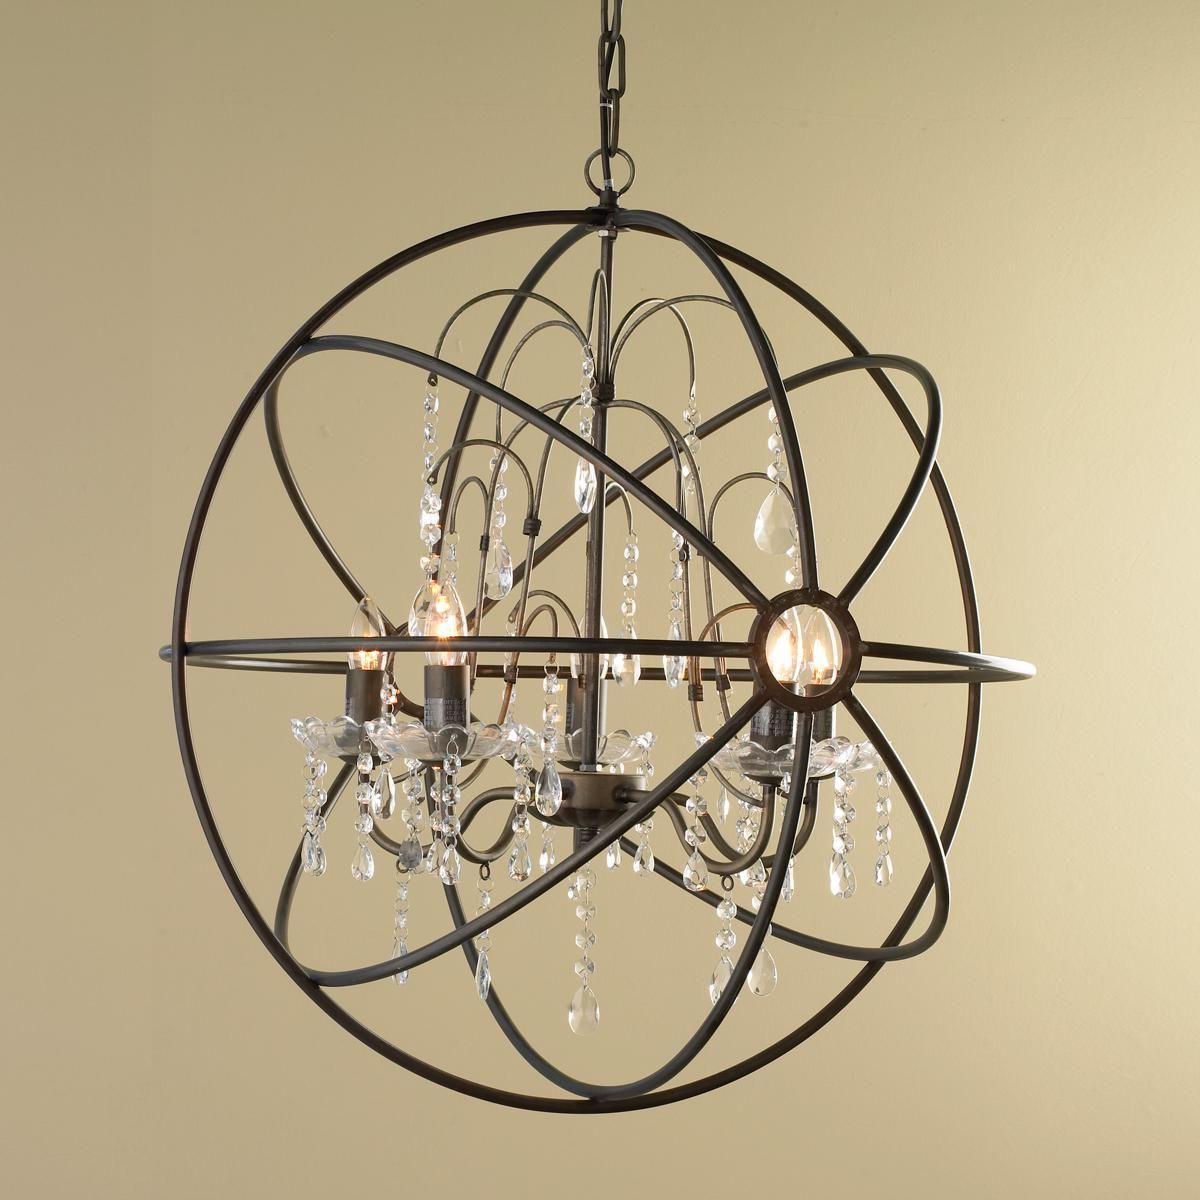 Home Design Gallery In Within Alden 6 Light Globe Chandeliers (View 12 of 25)